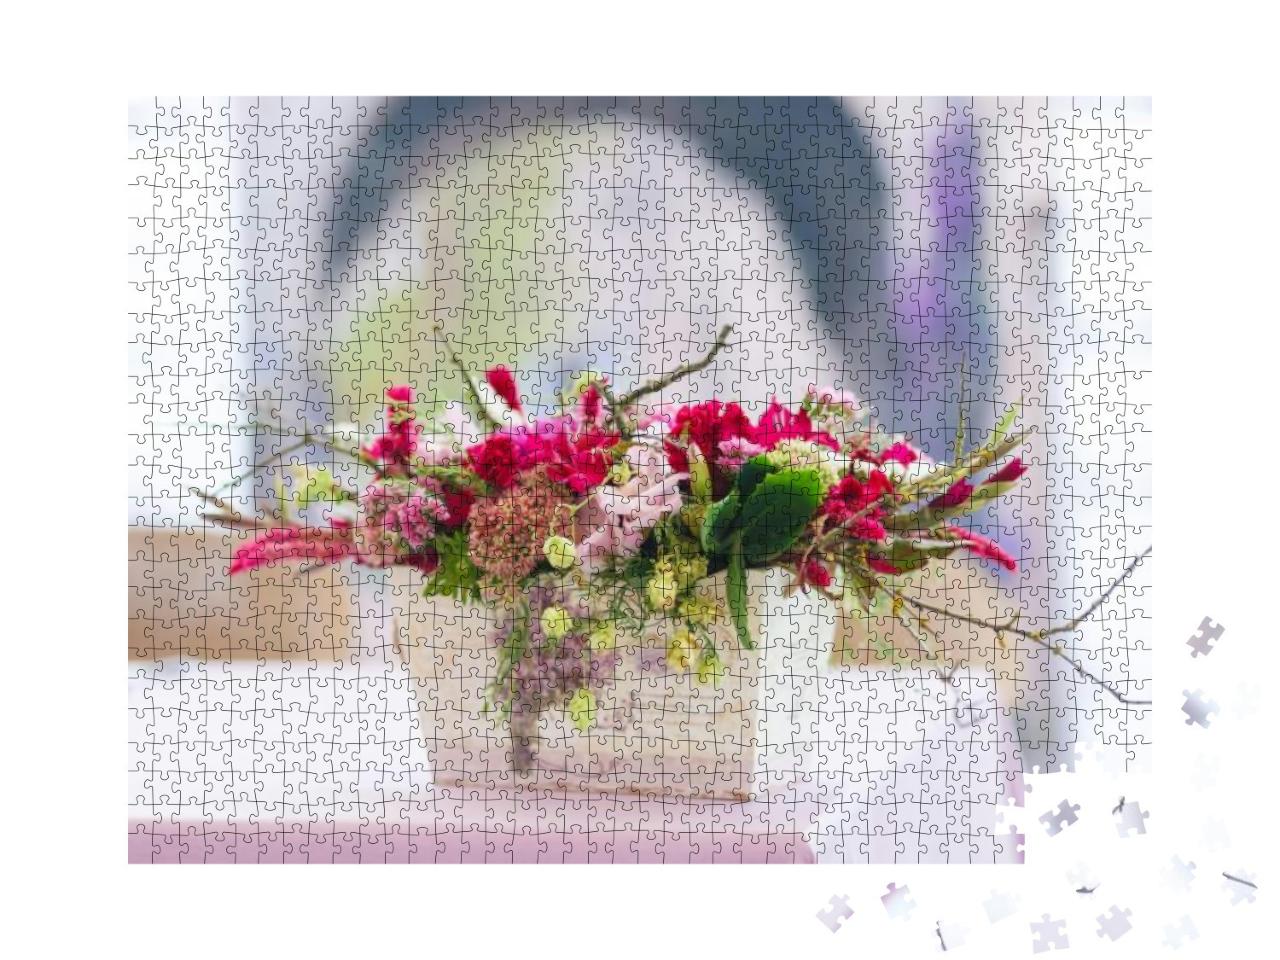 Beautiful Flowers Bouquets Decor in Vase Close-Up... Jigsaw Puzzle with 1000 pieces